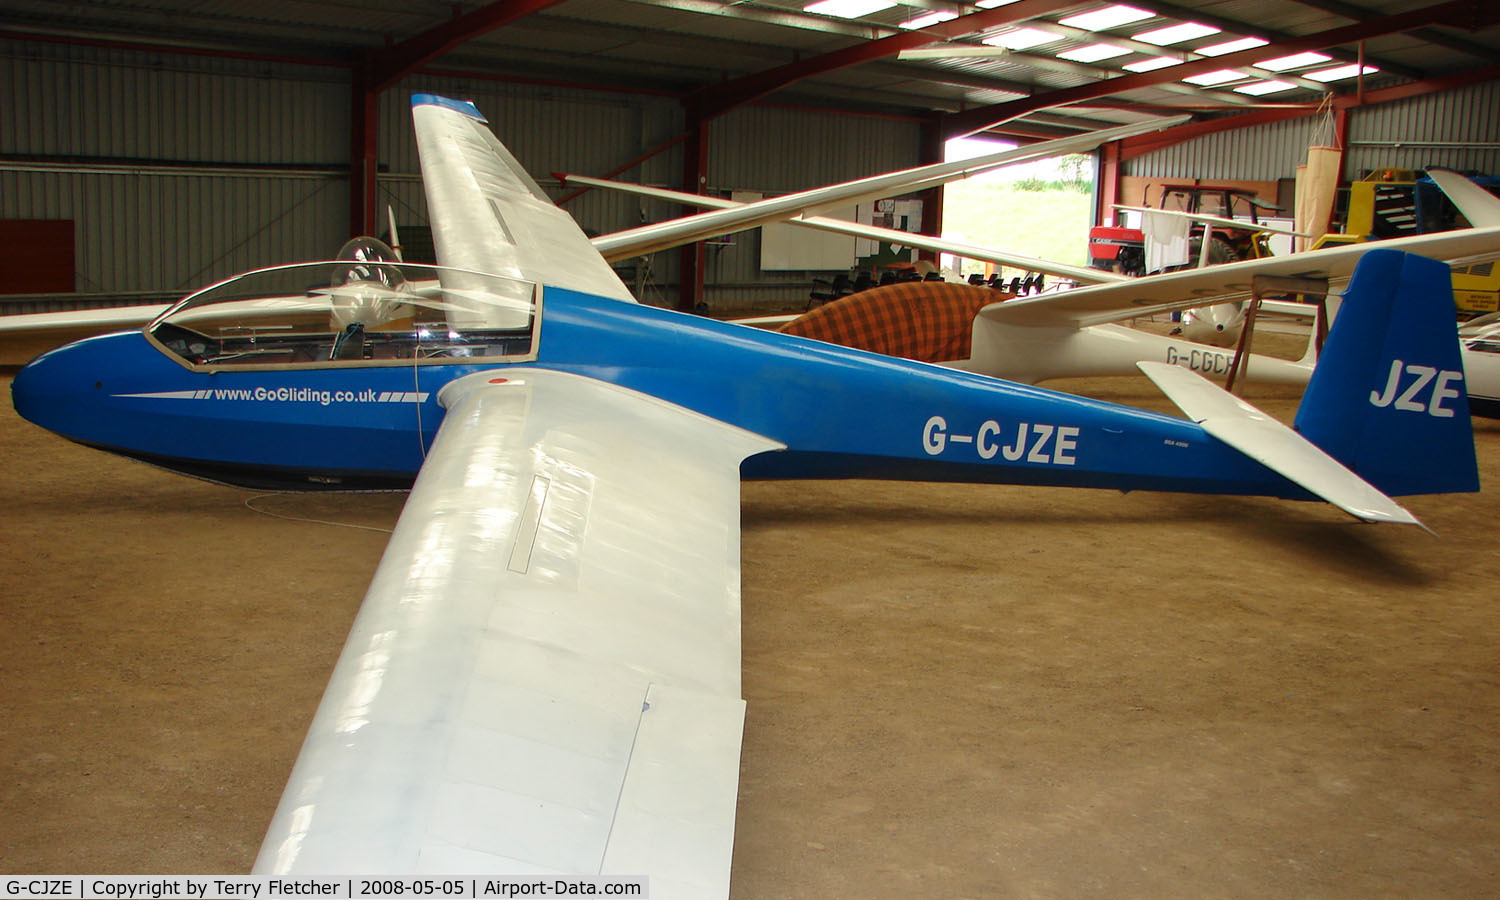 G-CJZE, 1973 Schleicher ASK-13 C/N 13423, A recent addition to the British Register at Needwood Forest Gliding Centre